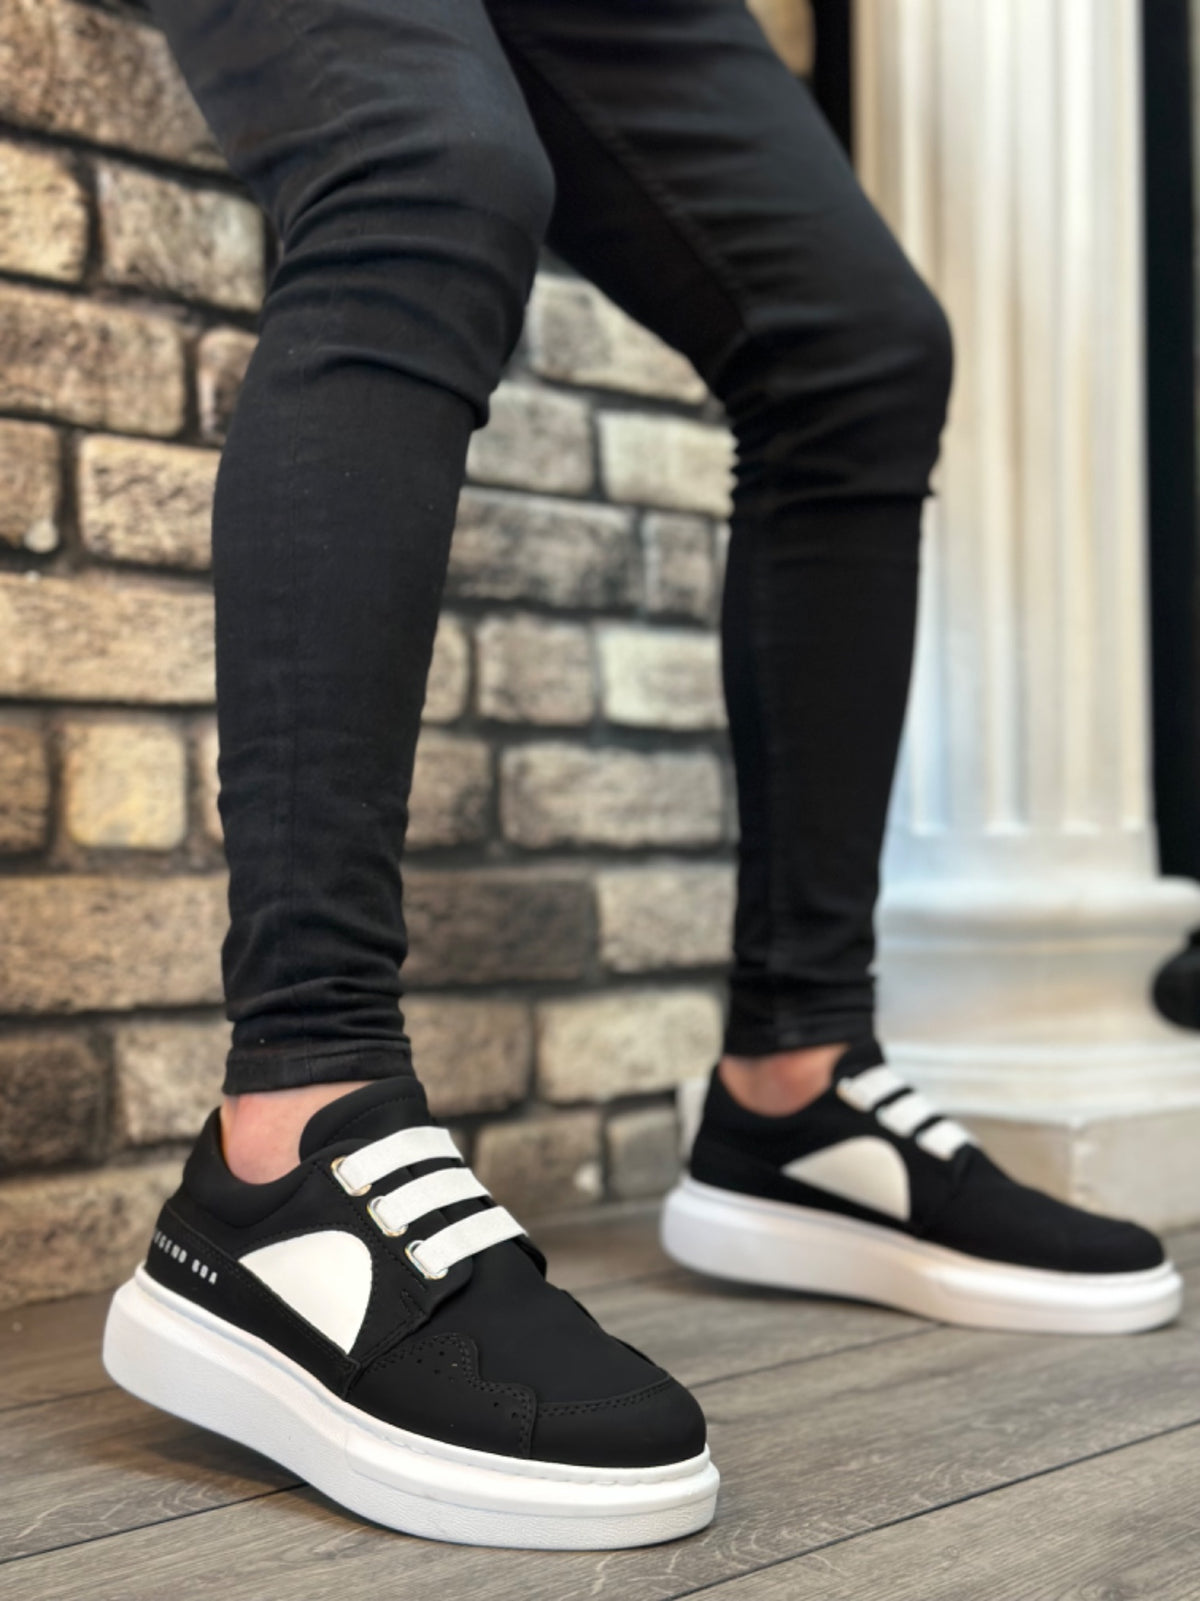 BA0302 Thick Sole Lace-Up Style Casual Black White Men's Sneakers Shoes - STREETMODE™